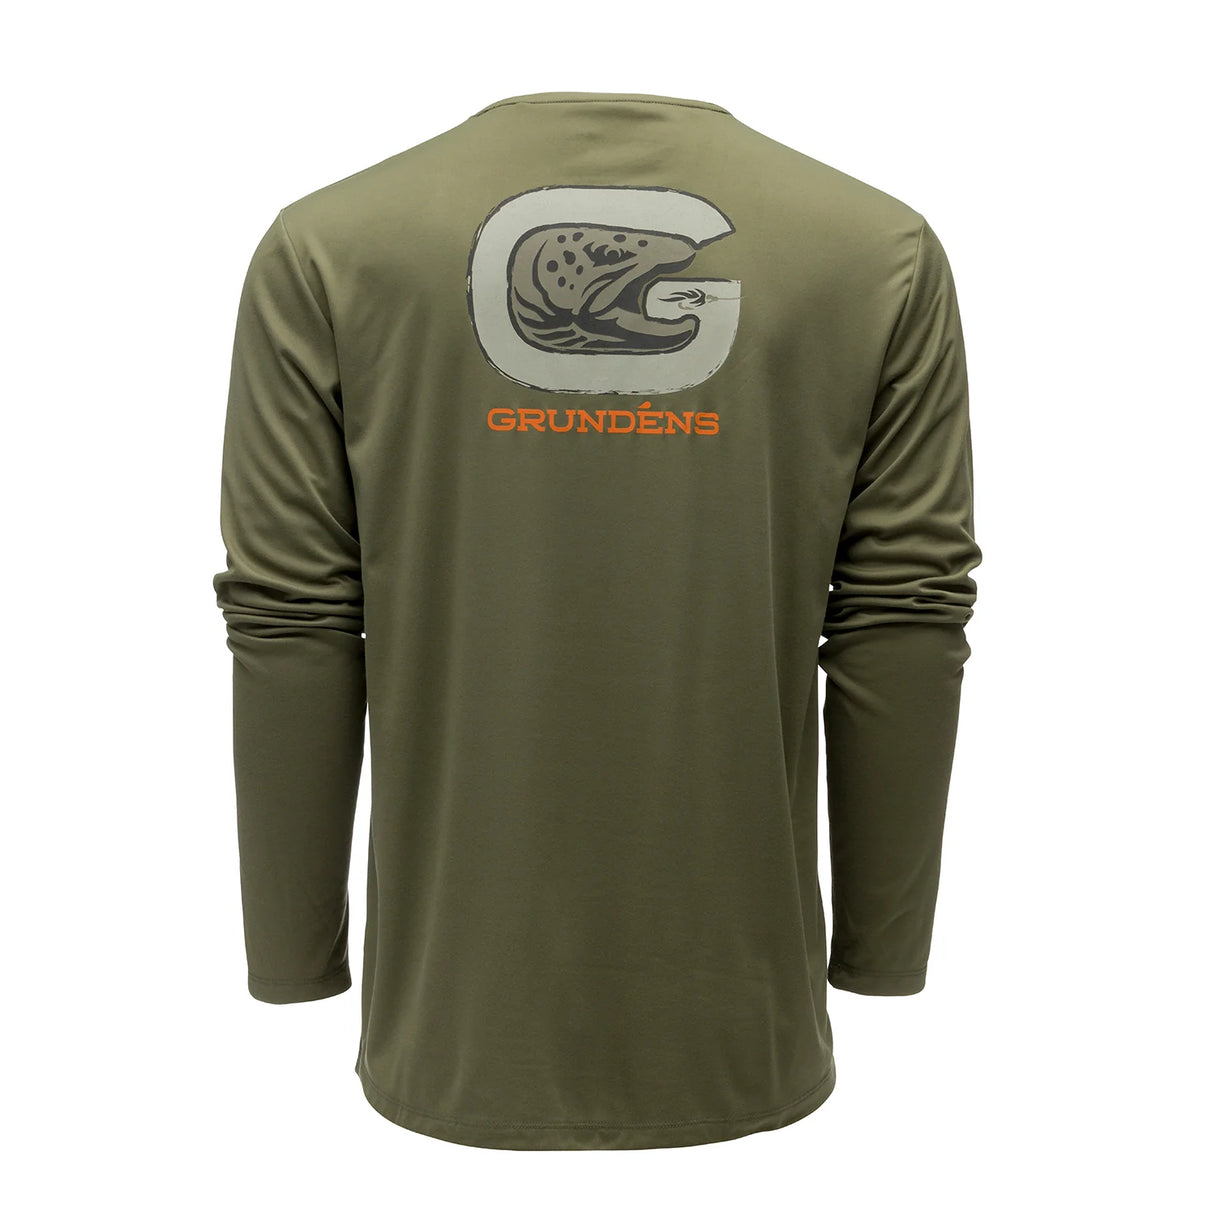 Grundens Men's G Trout Long-Sleeve Tech Tee - Forest M